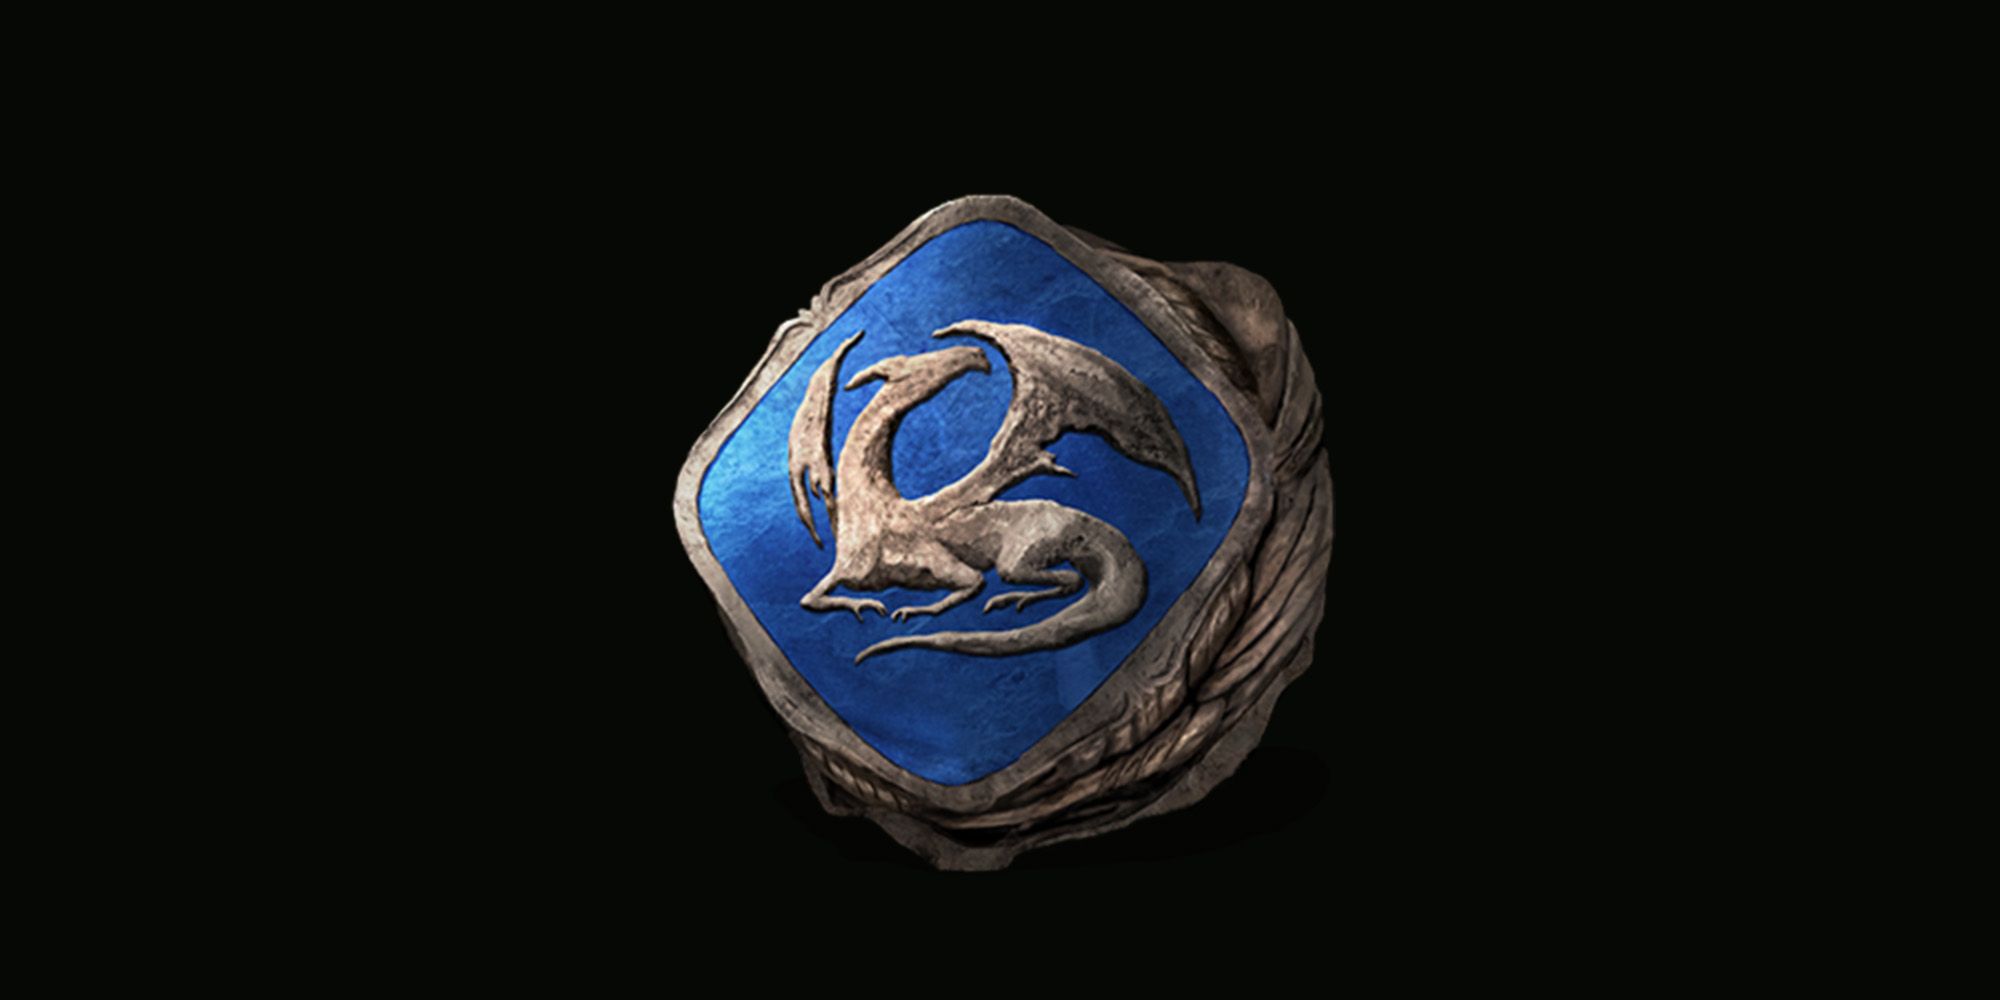 Ring Game Dark Souls Series Men Rings Havel039s Demon039s Scar Chloranthy  Badge Metal Ring Male Fans Cosplay Jewelry Accesso6555733087373 From Oygn,  $12.07 | DHgate.Com